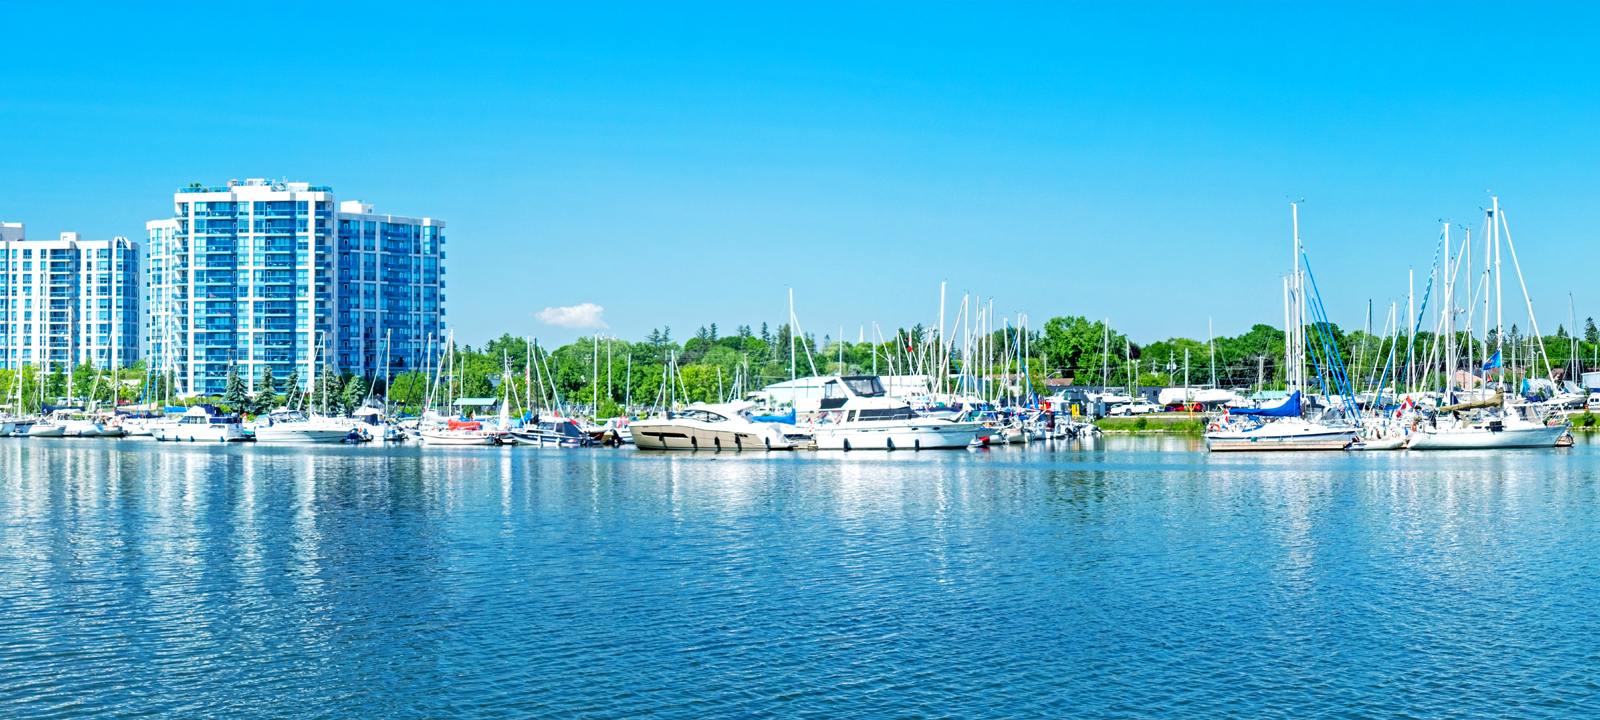 Reflections of a building and boats in the water of the Whitby Marina on Lake Ontario.